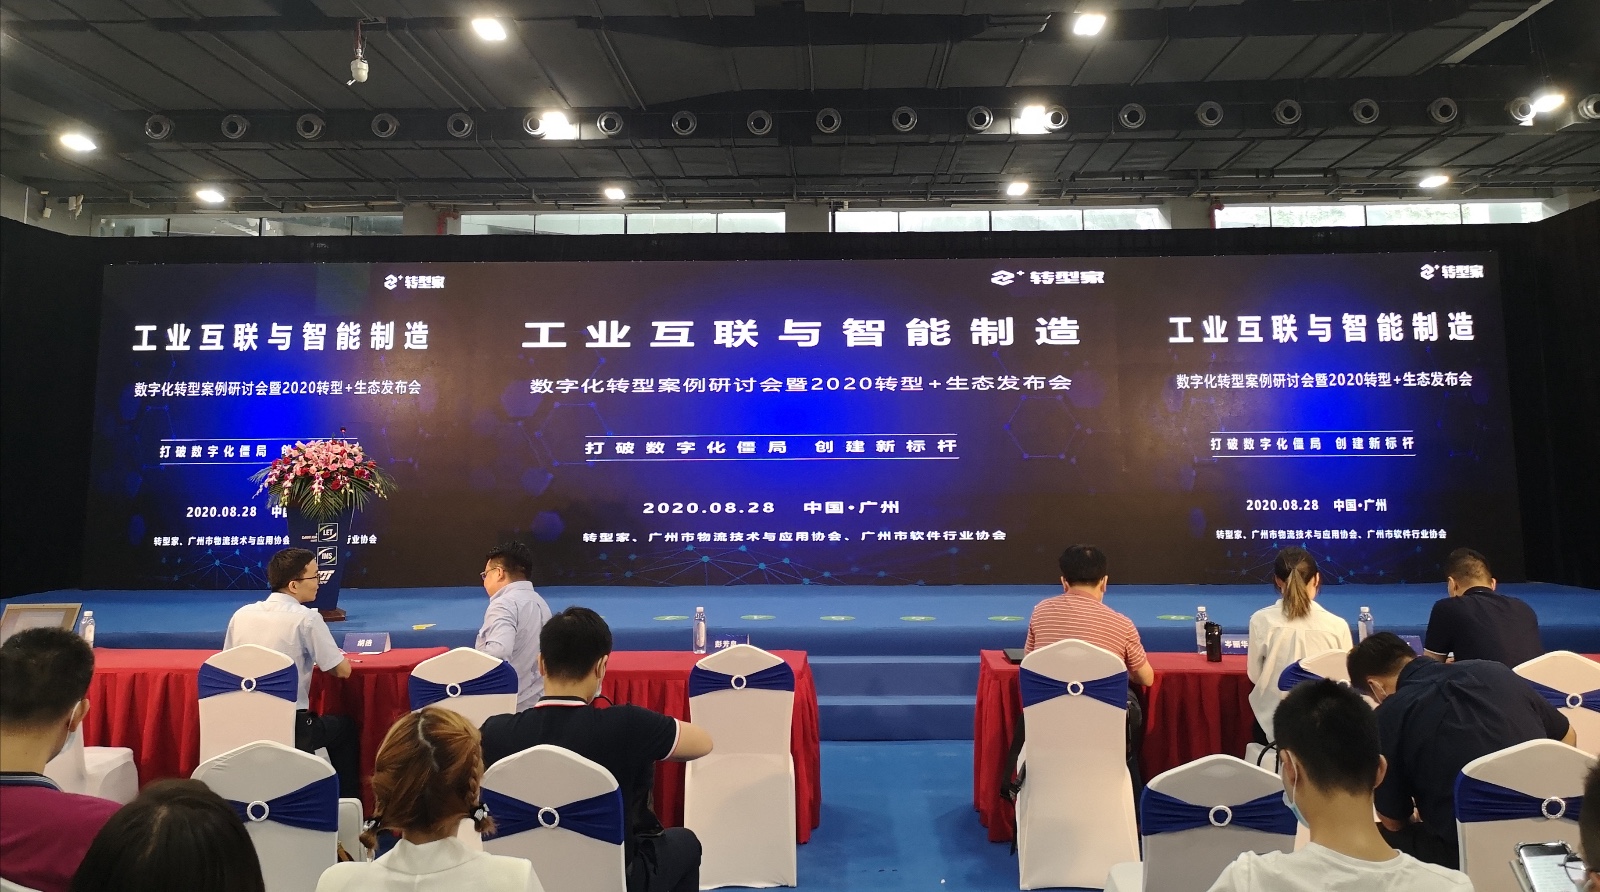 Focusing on Industrial Interconnection and Intelligent Manufacturing, Saiyi Information Empowers Ent